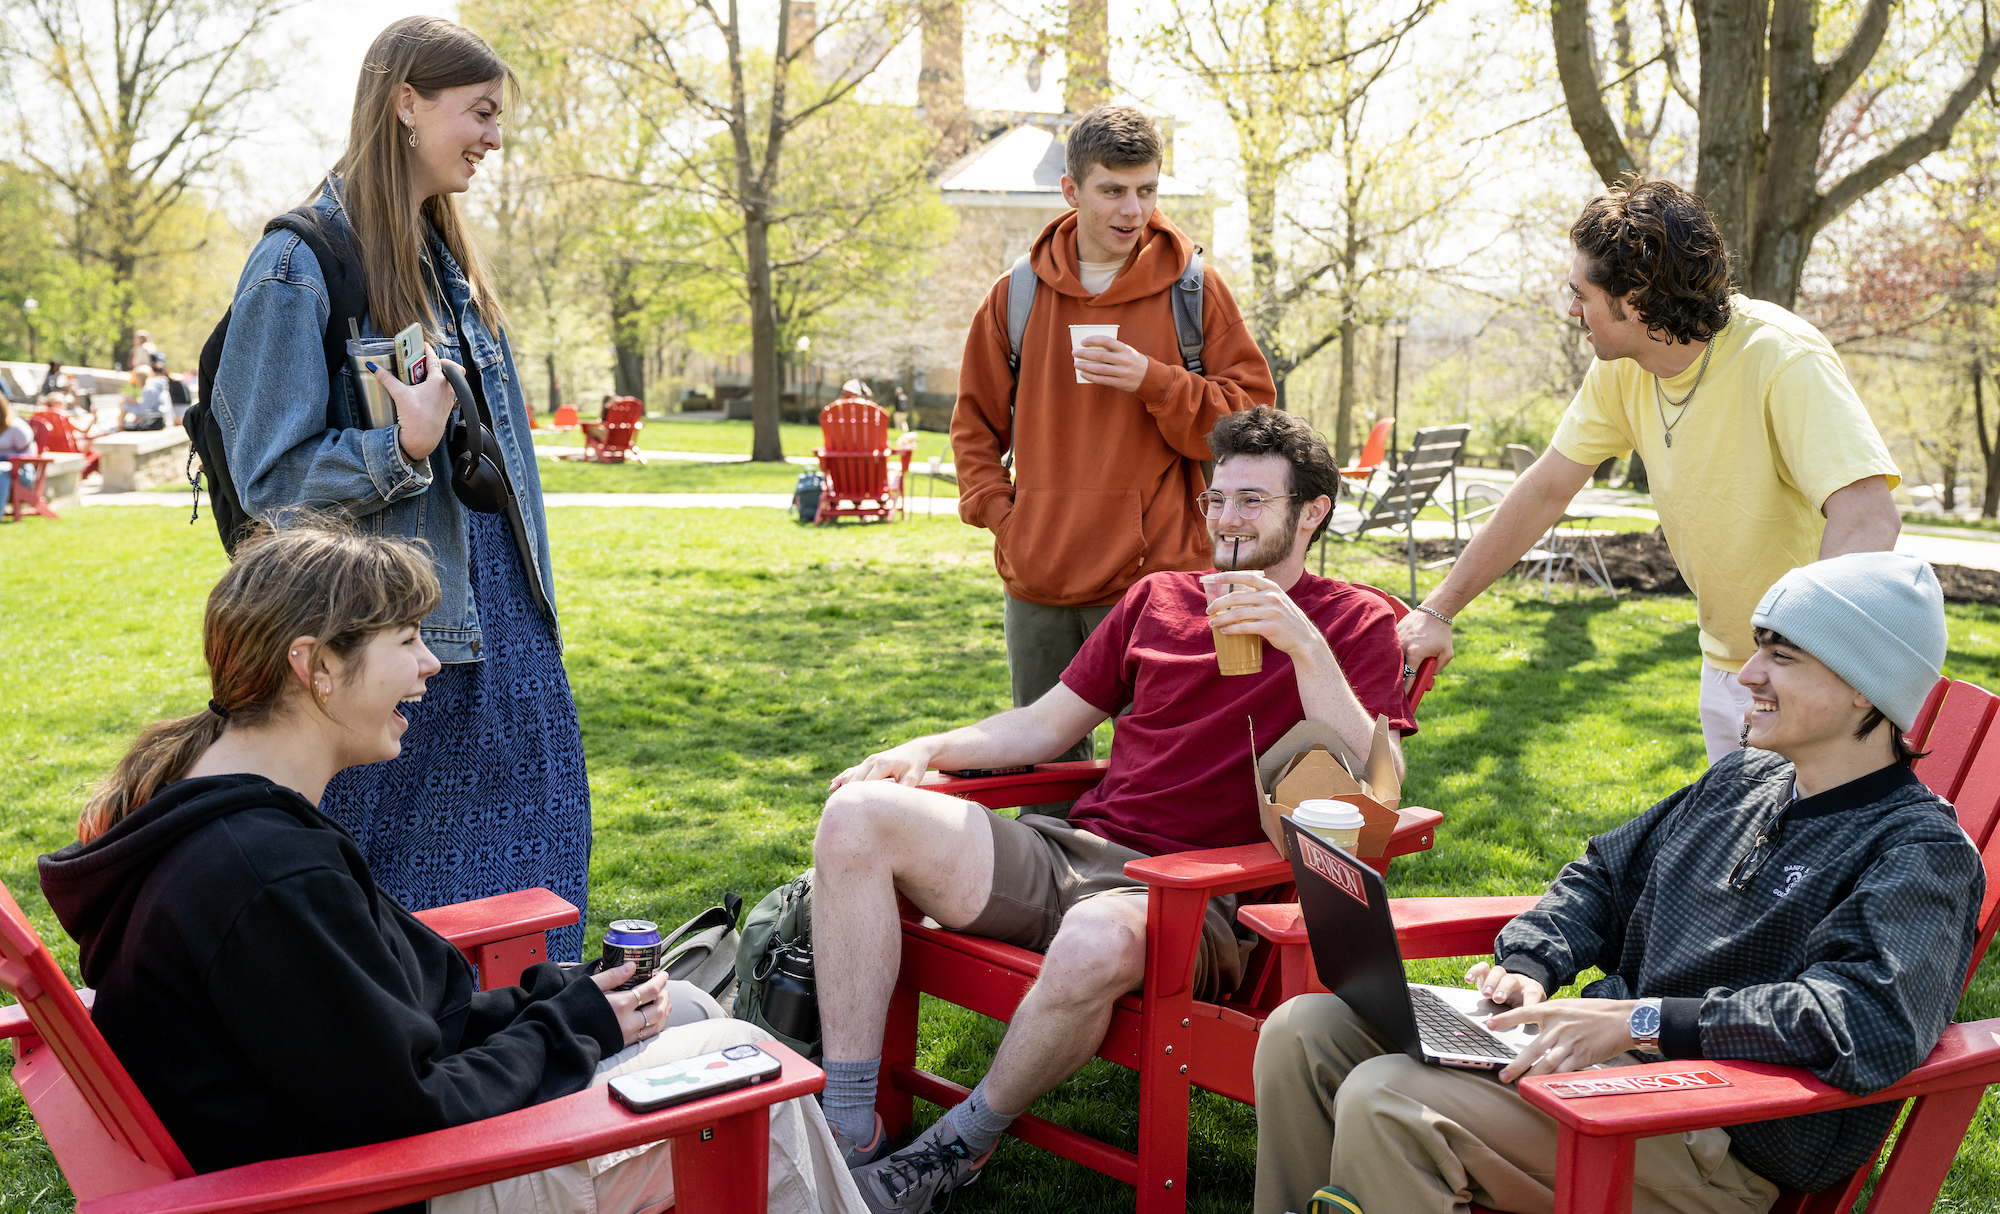 https://denison.eduPicture of college students sitting on chairs outside and having a conversation